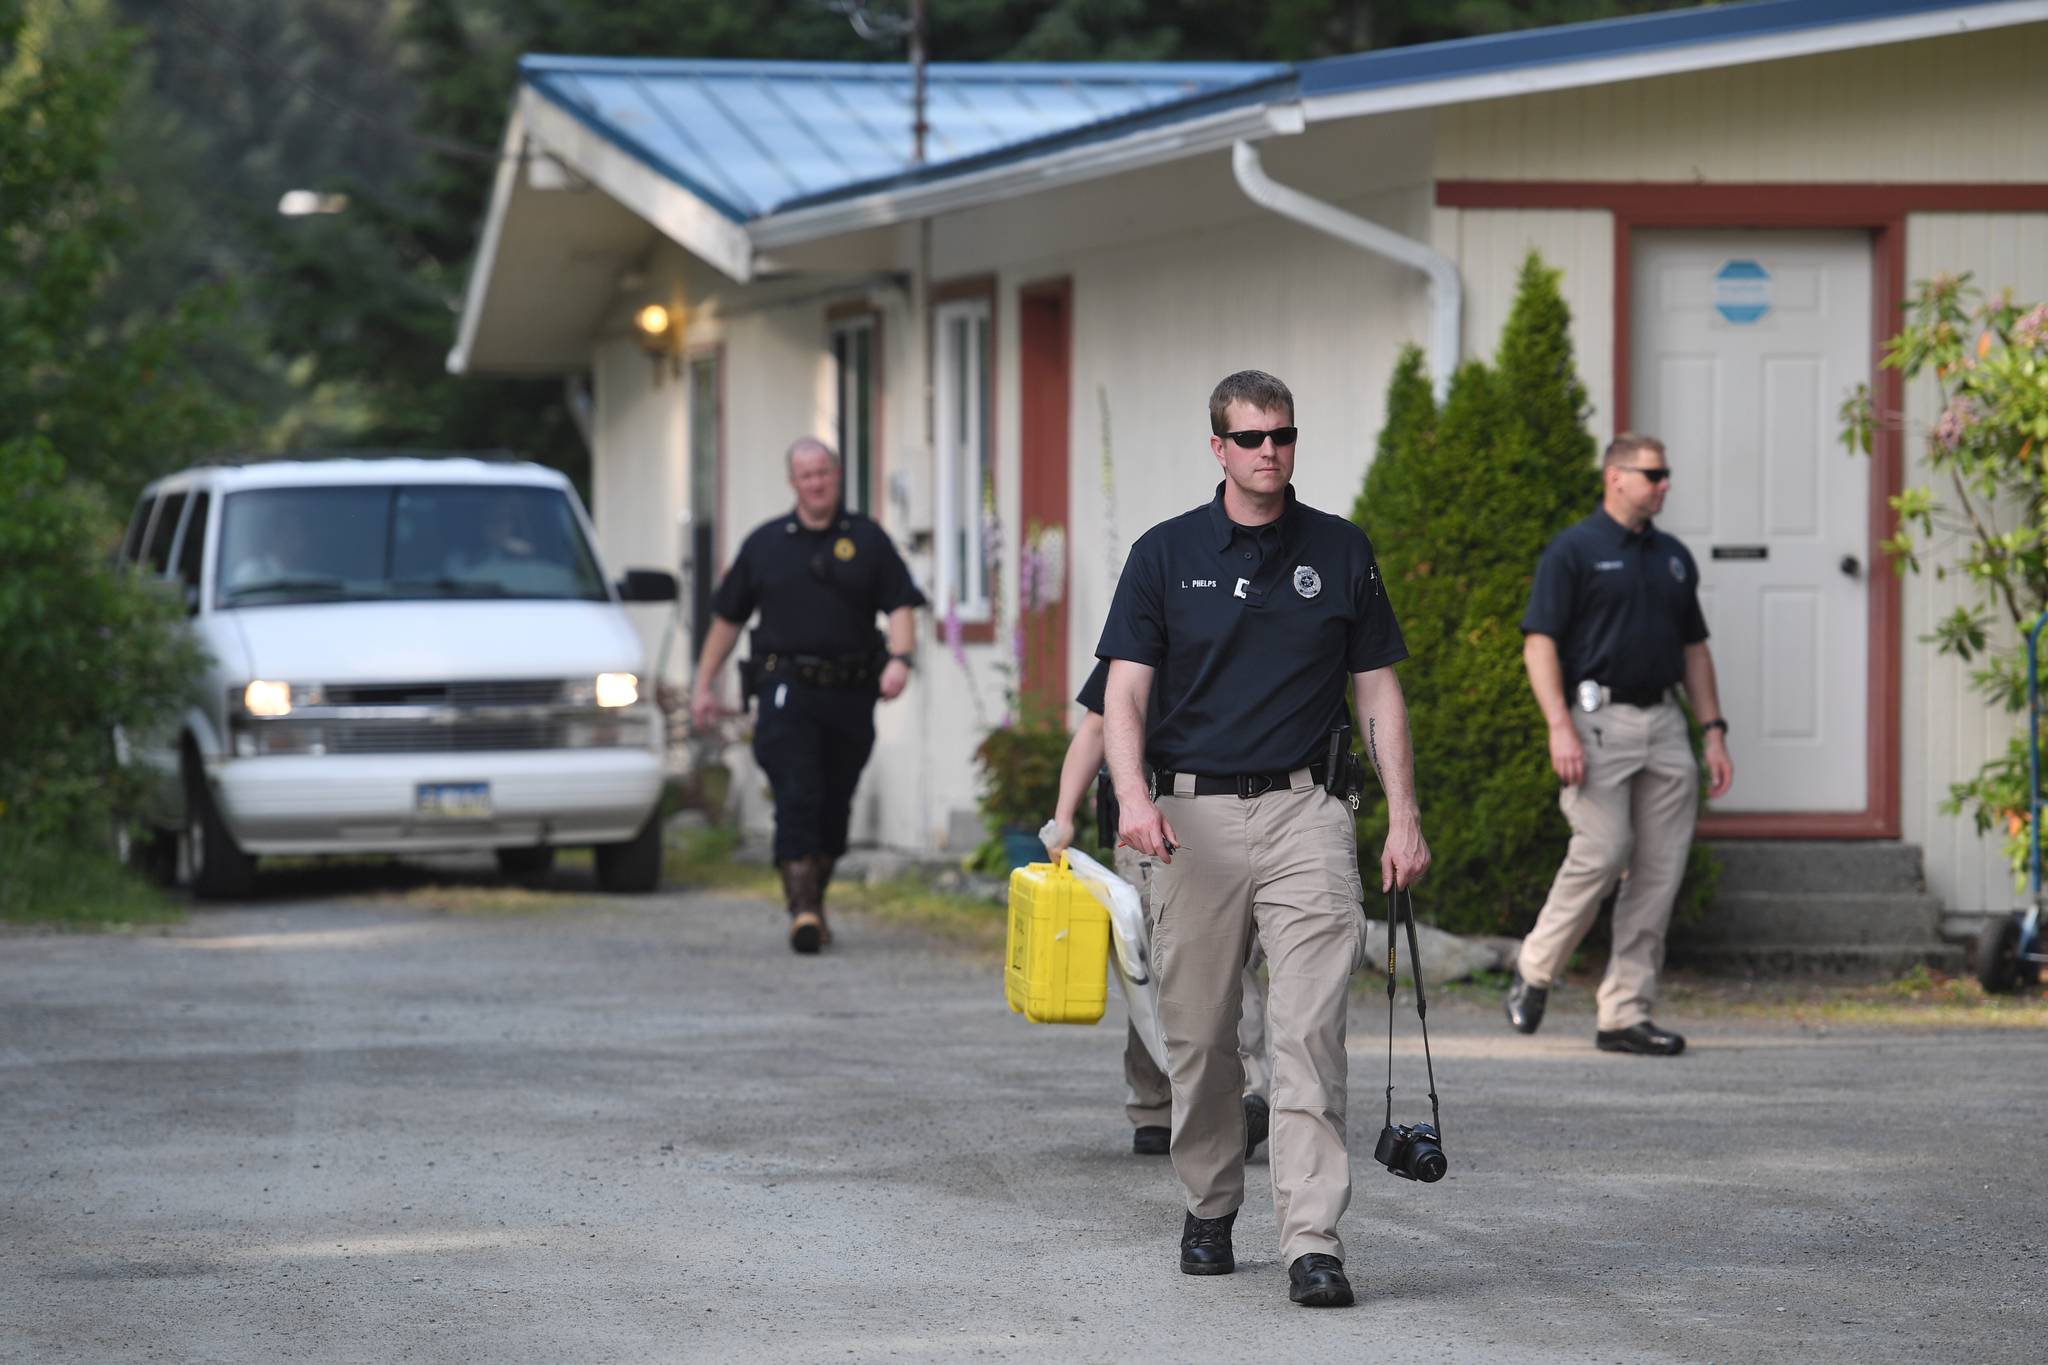 JPD detectives leave 9010 Atlin Drive as a body is driven away on Wednesday, July 3, 2019. (Michael Penn | Juneau Empire)